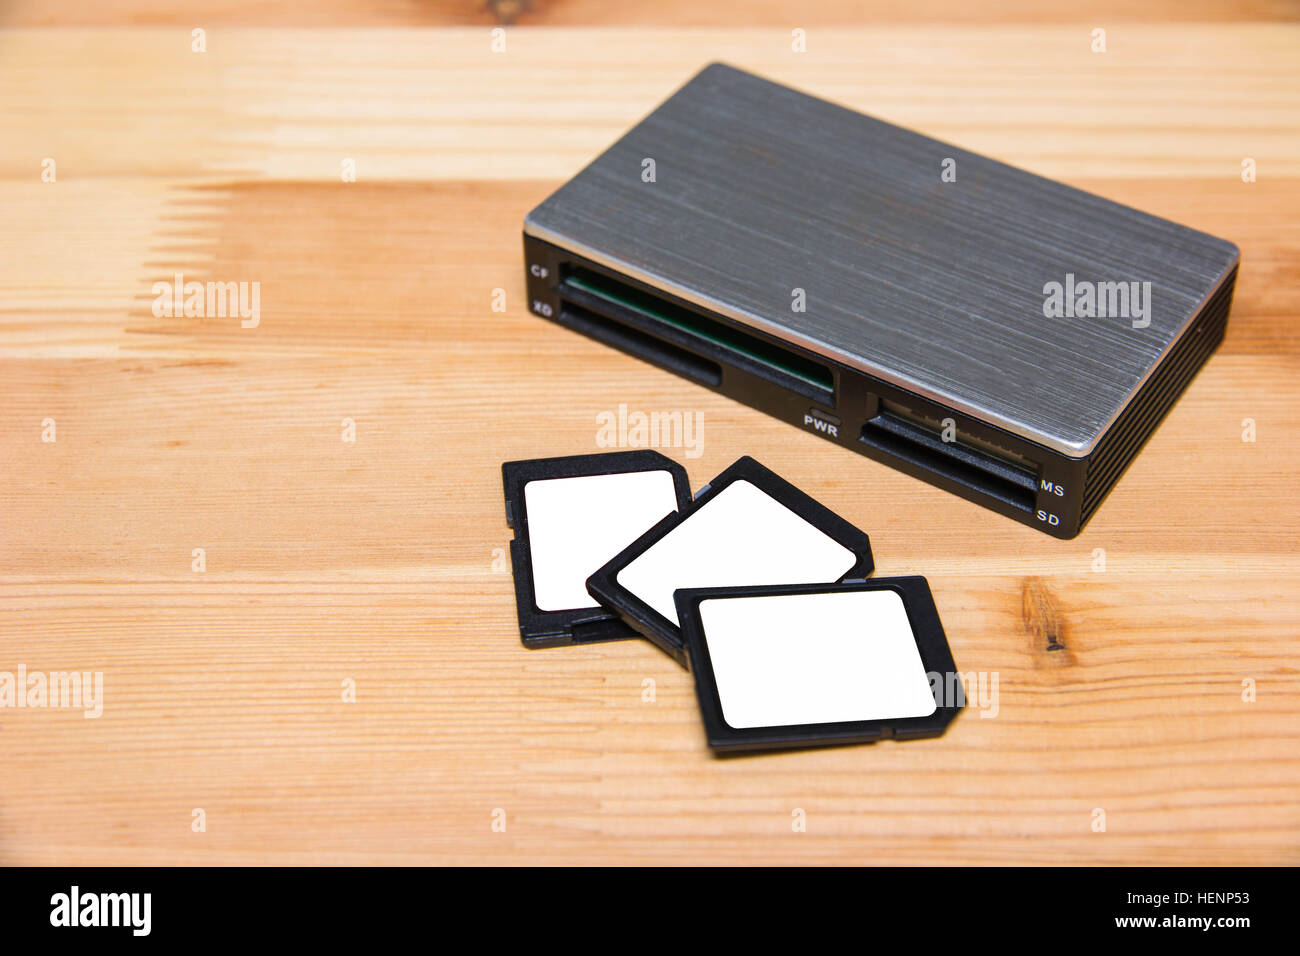 usb card reader with 3 cards on wooden table Stock Photo